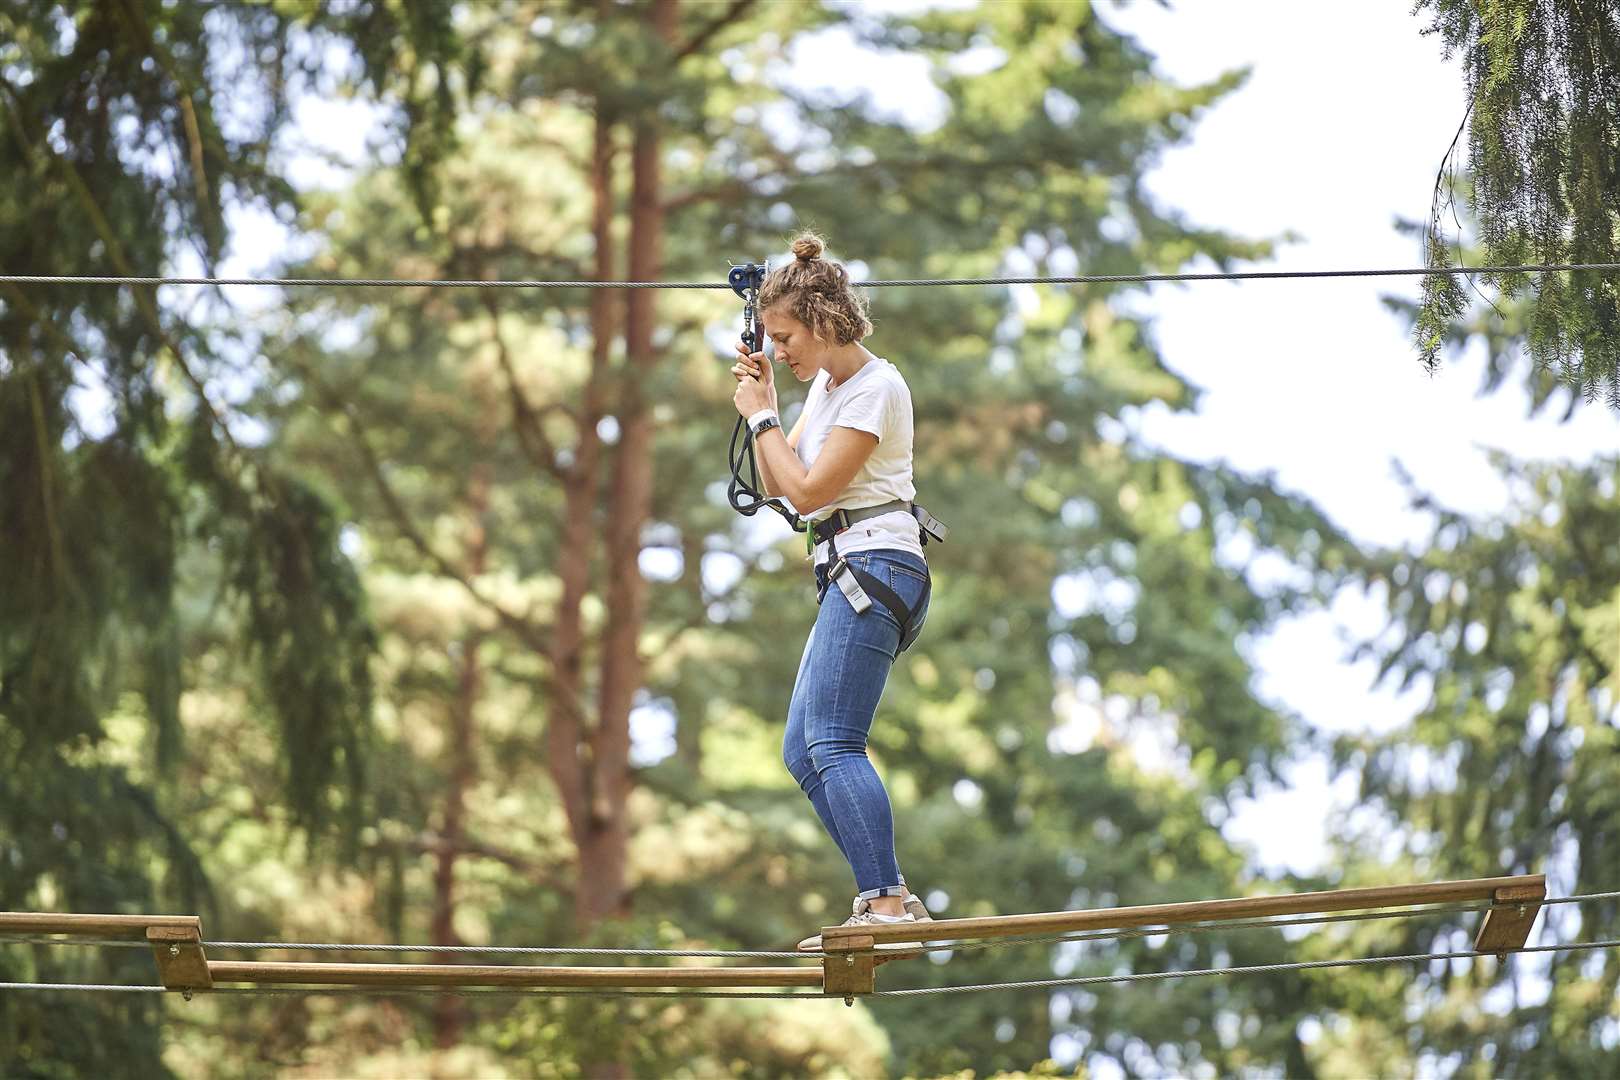 Go Ape will be one of the facilities reopening when rules relax next week